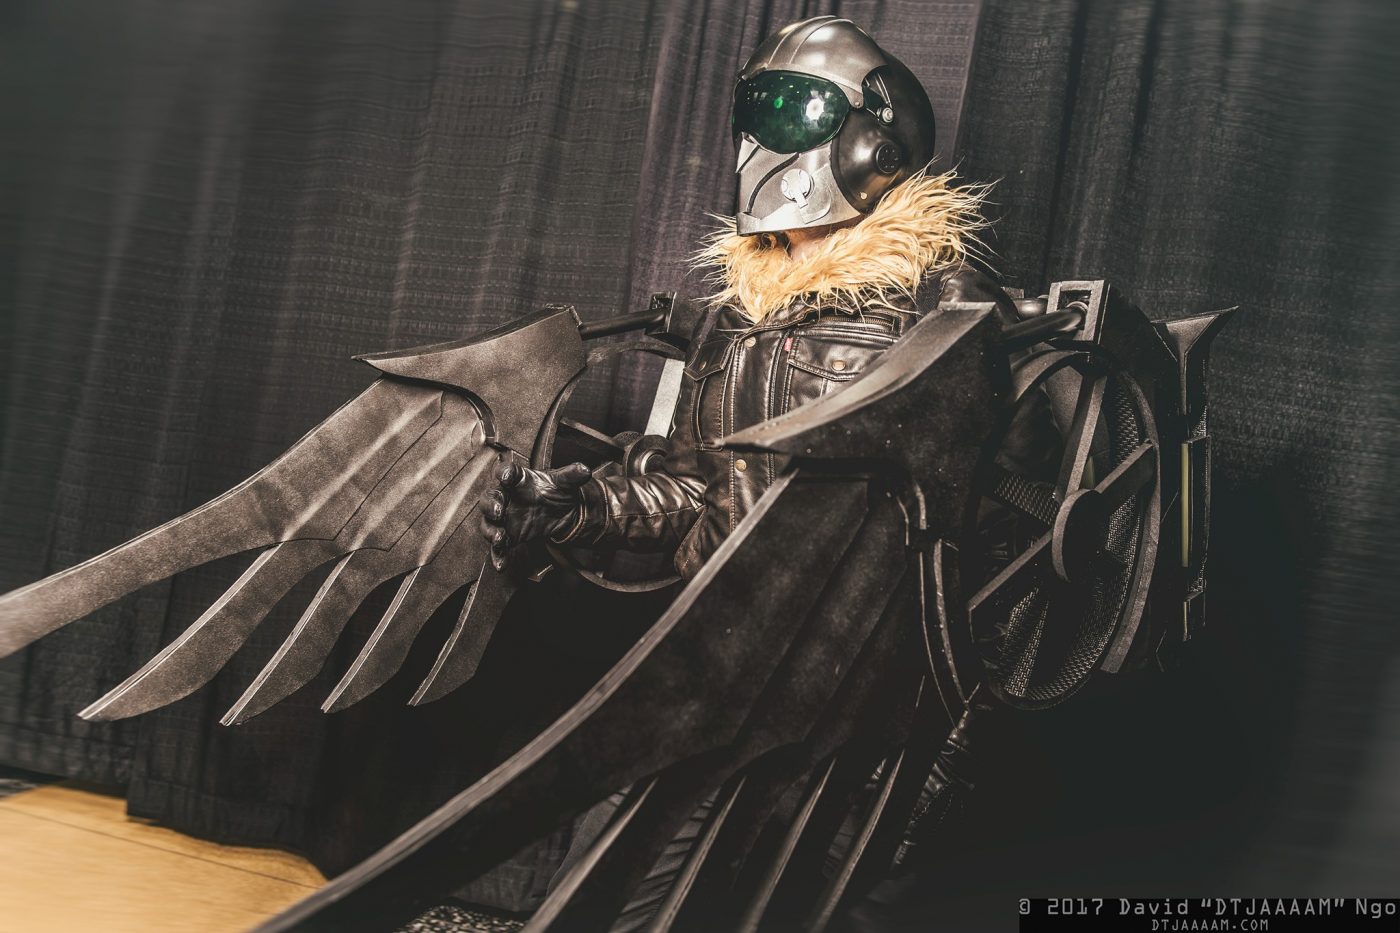 Spider-Man: Homecoming: Vulture cosplay by Black Zero